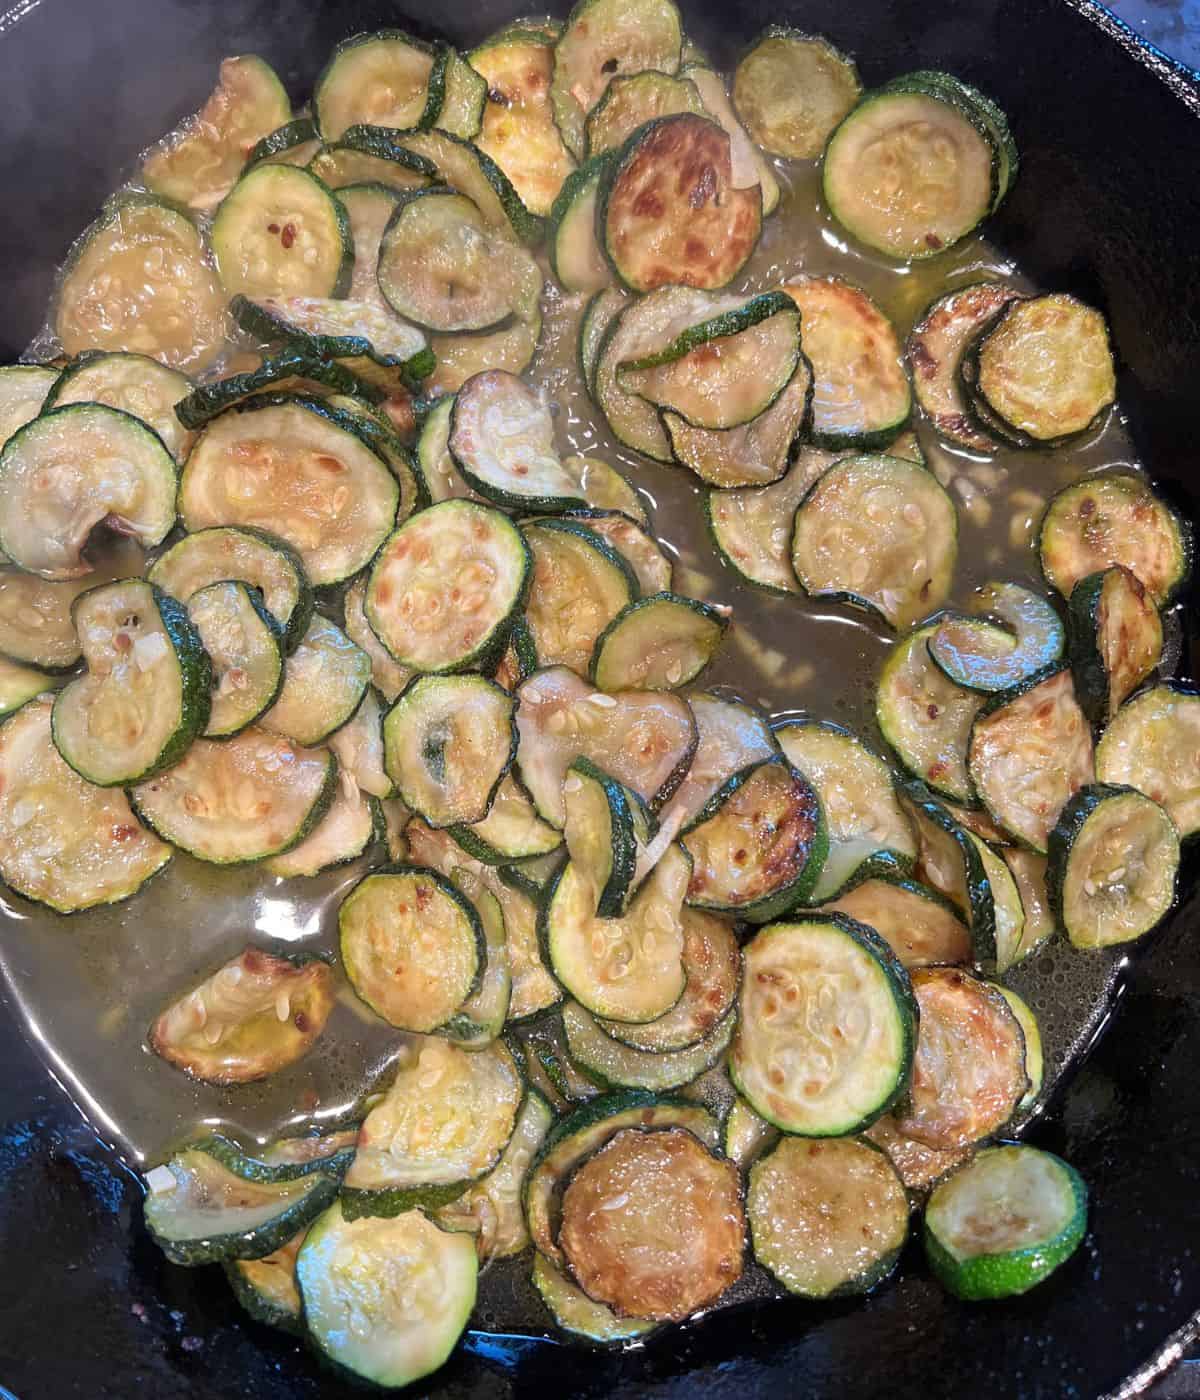 Boiling fried zucchini in cast iron skillet.